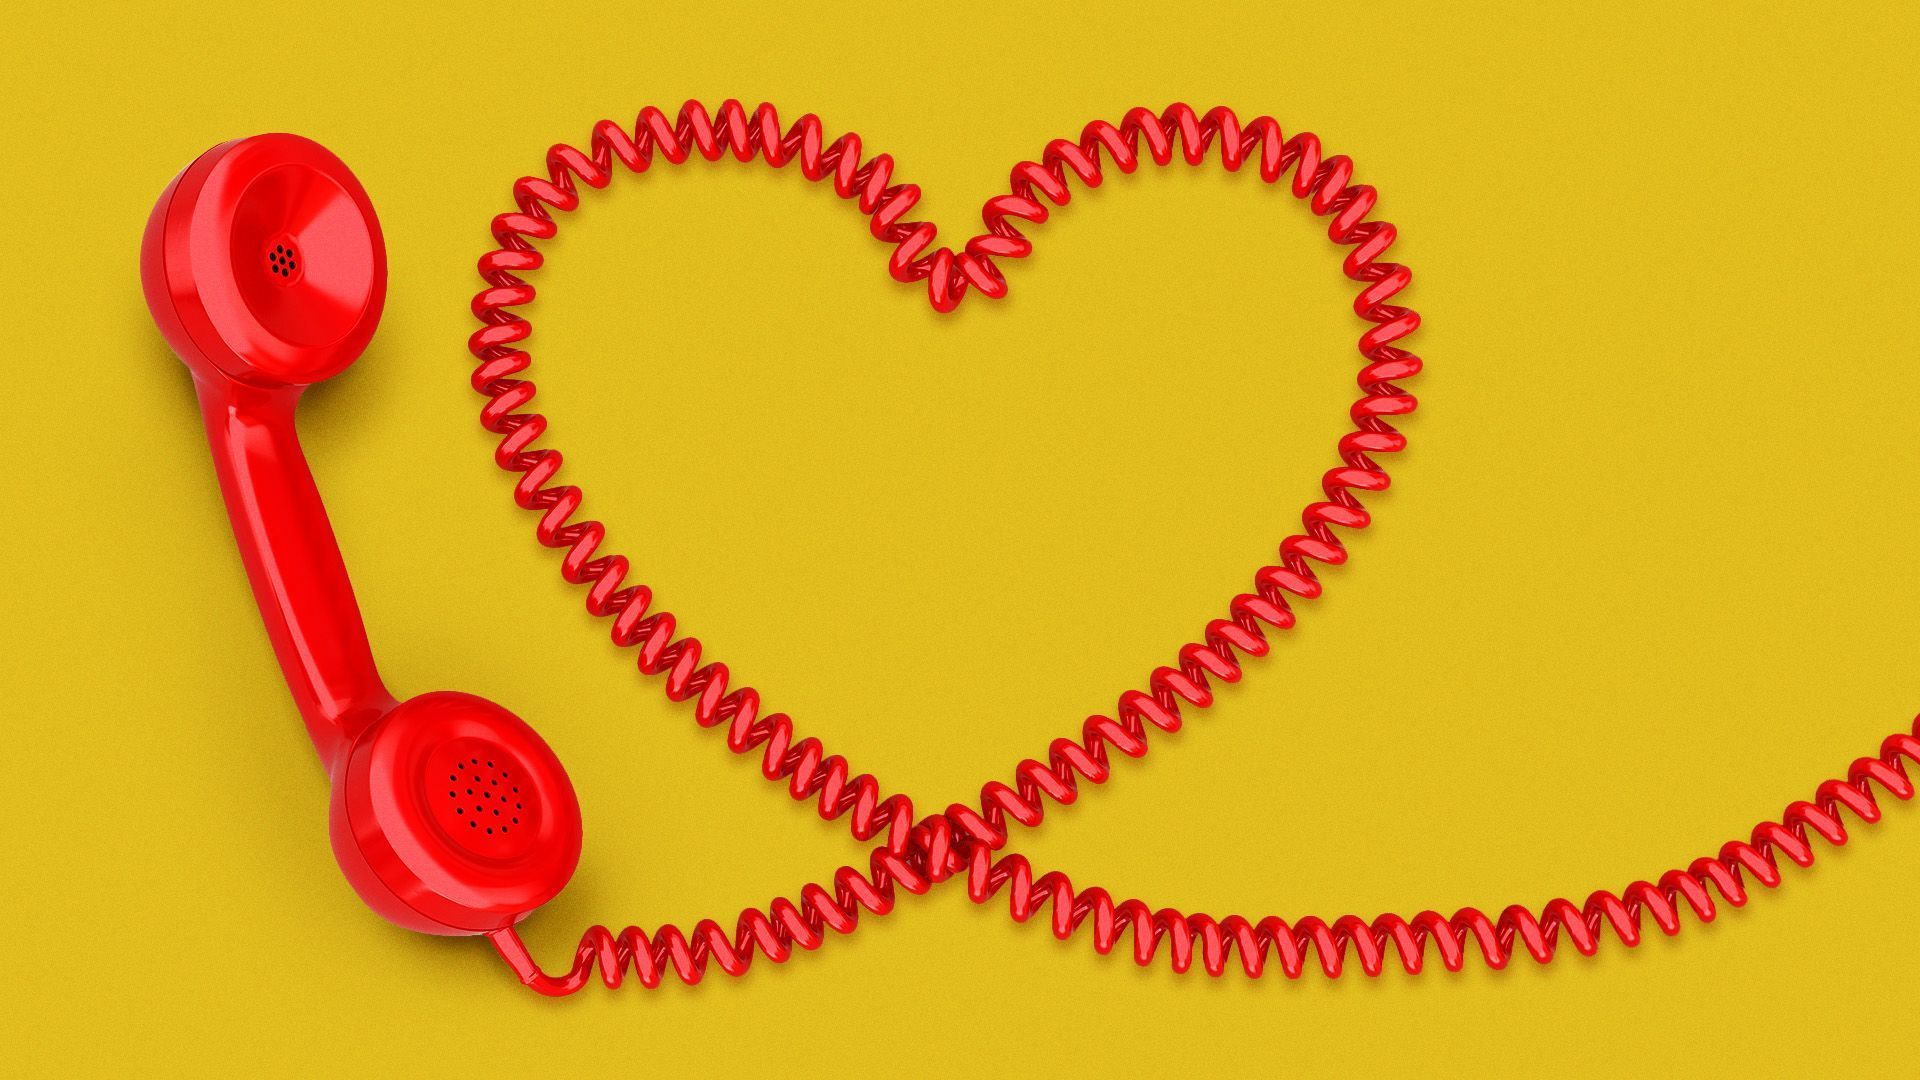 Illustration of a phone whose cord is making a heart shape